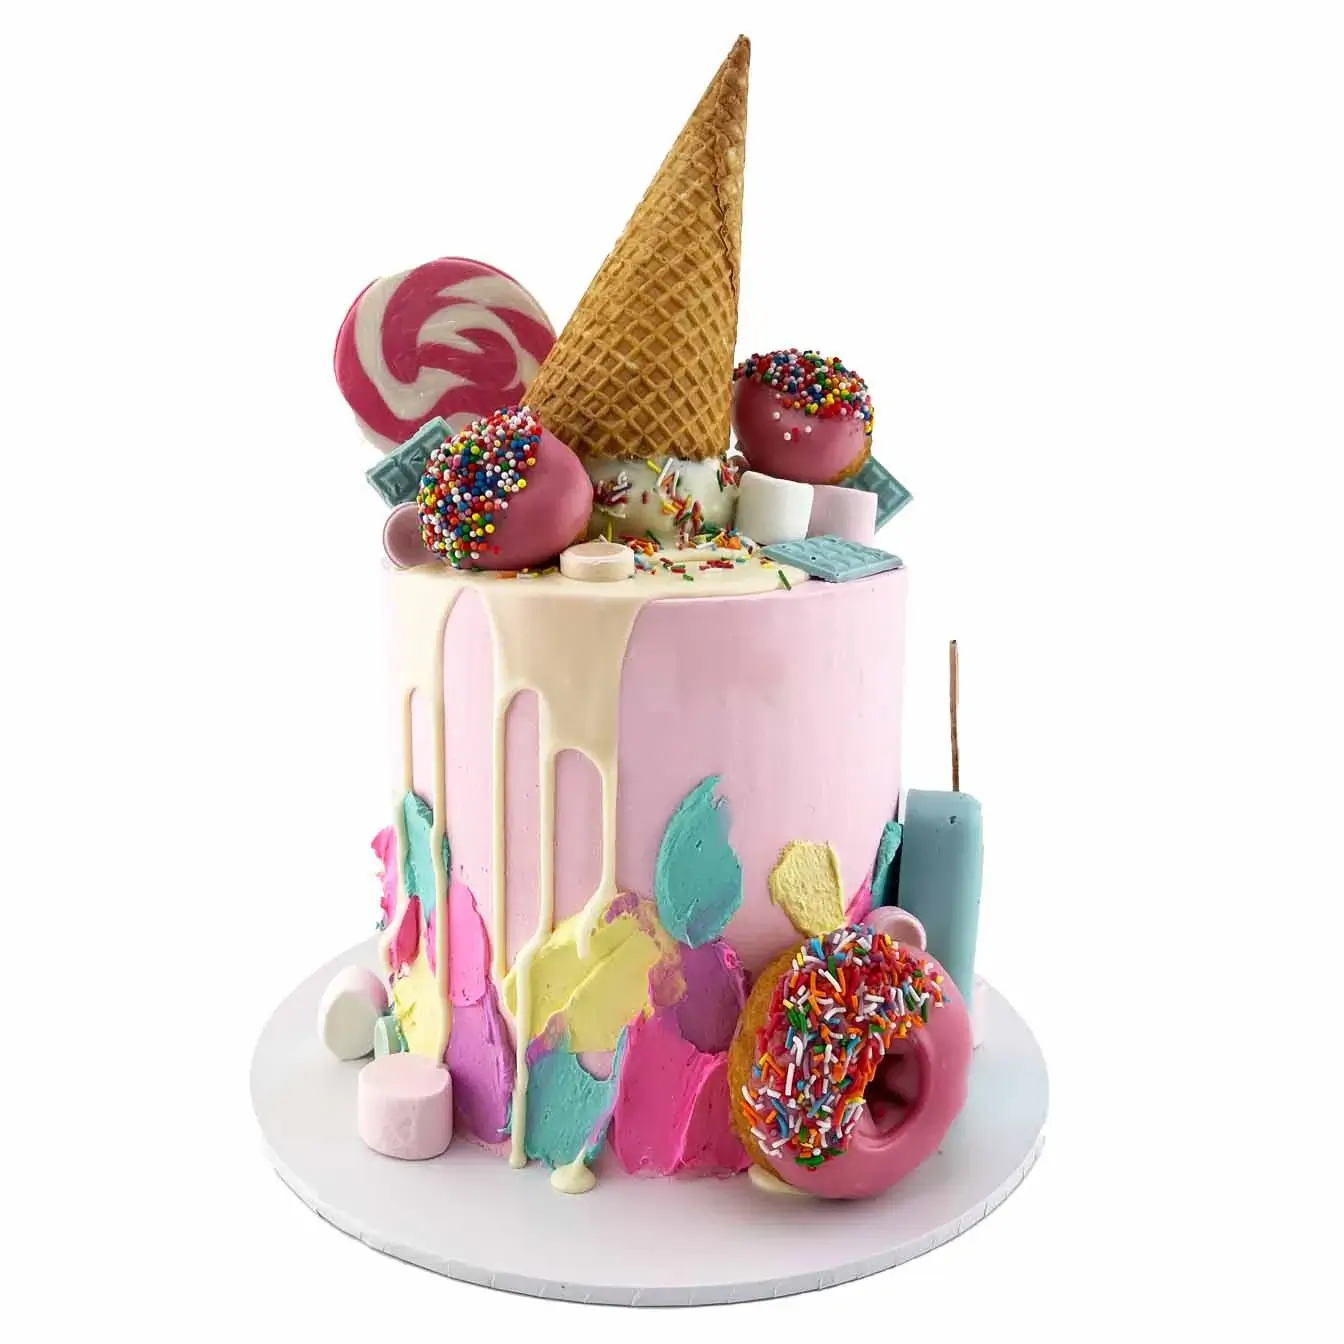 Ice cream drip cake: colourful layers of cake topped with lollies, donuts, and pastel-coloured icing drips.